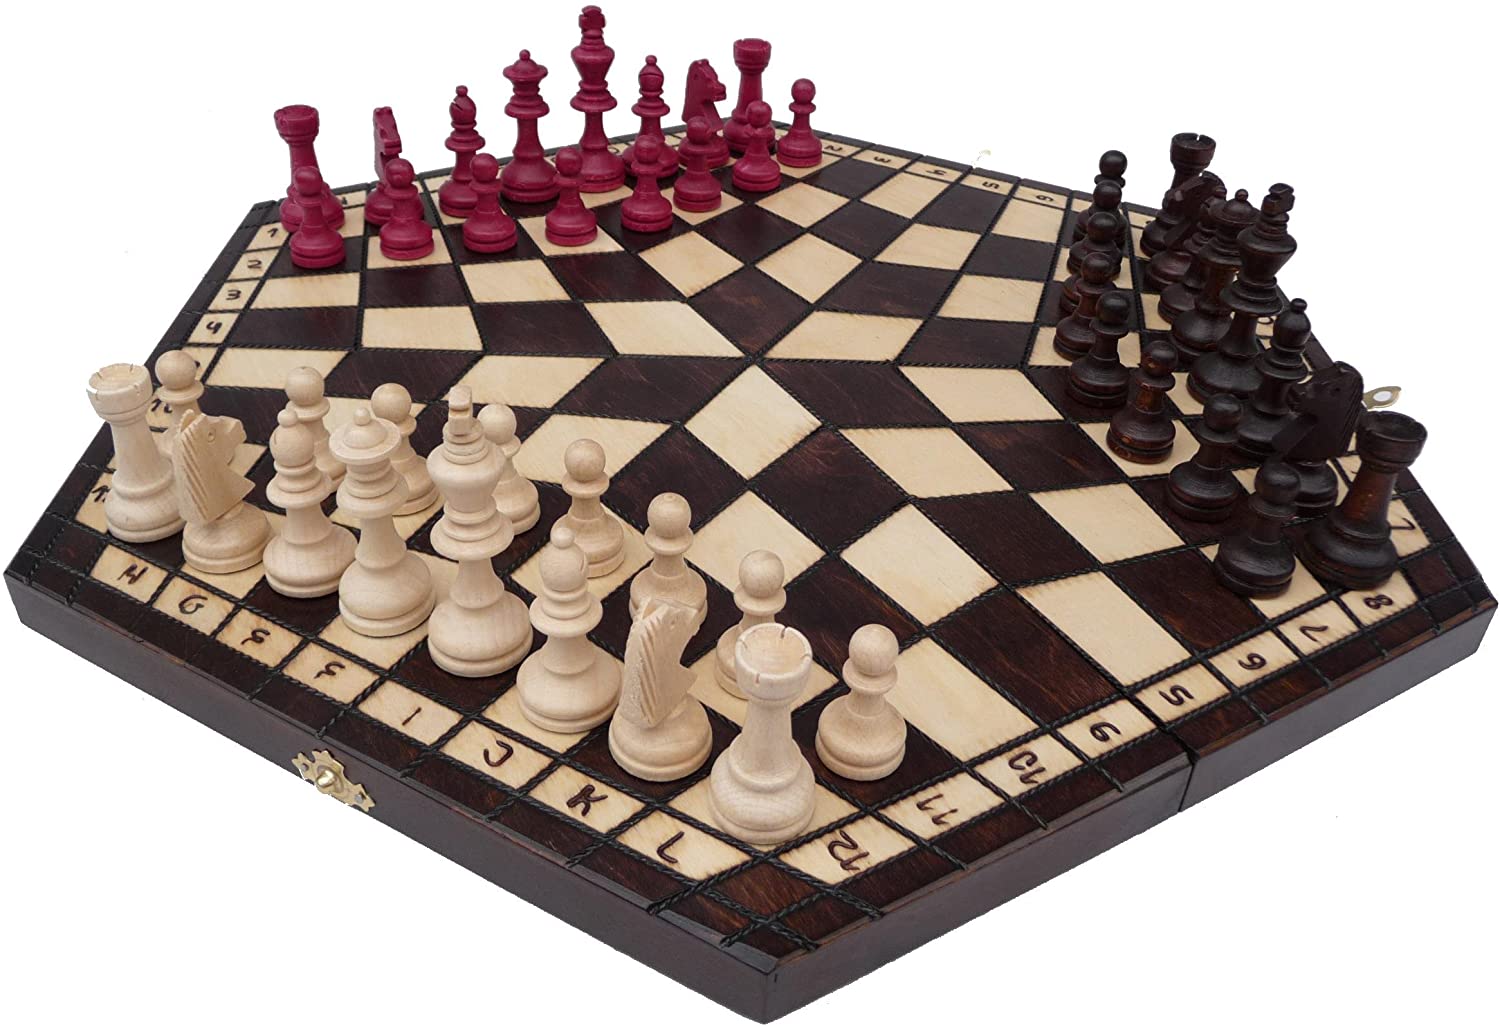 How to Play Chess Online?